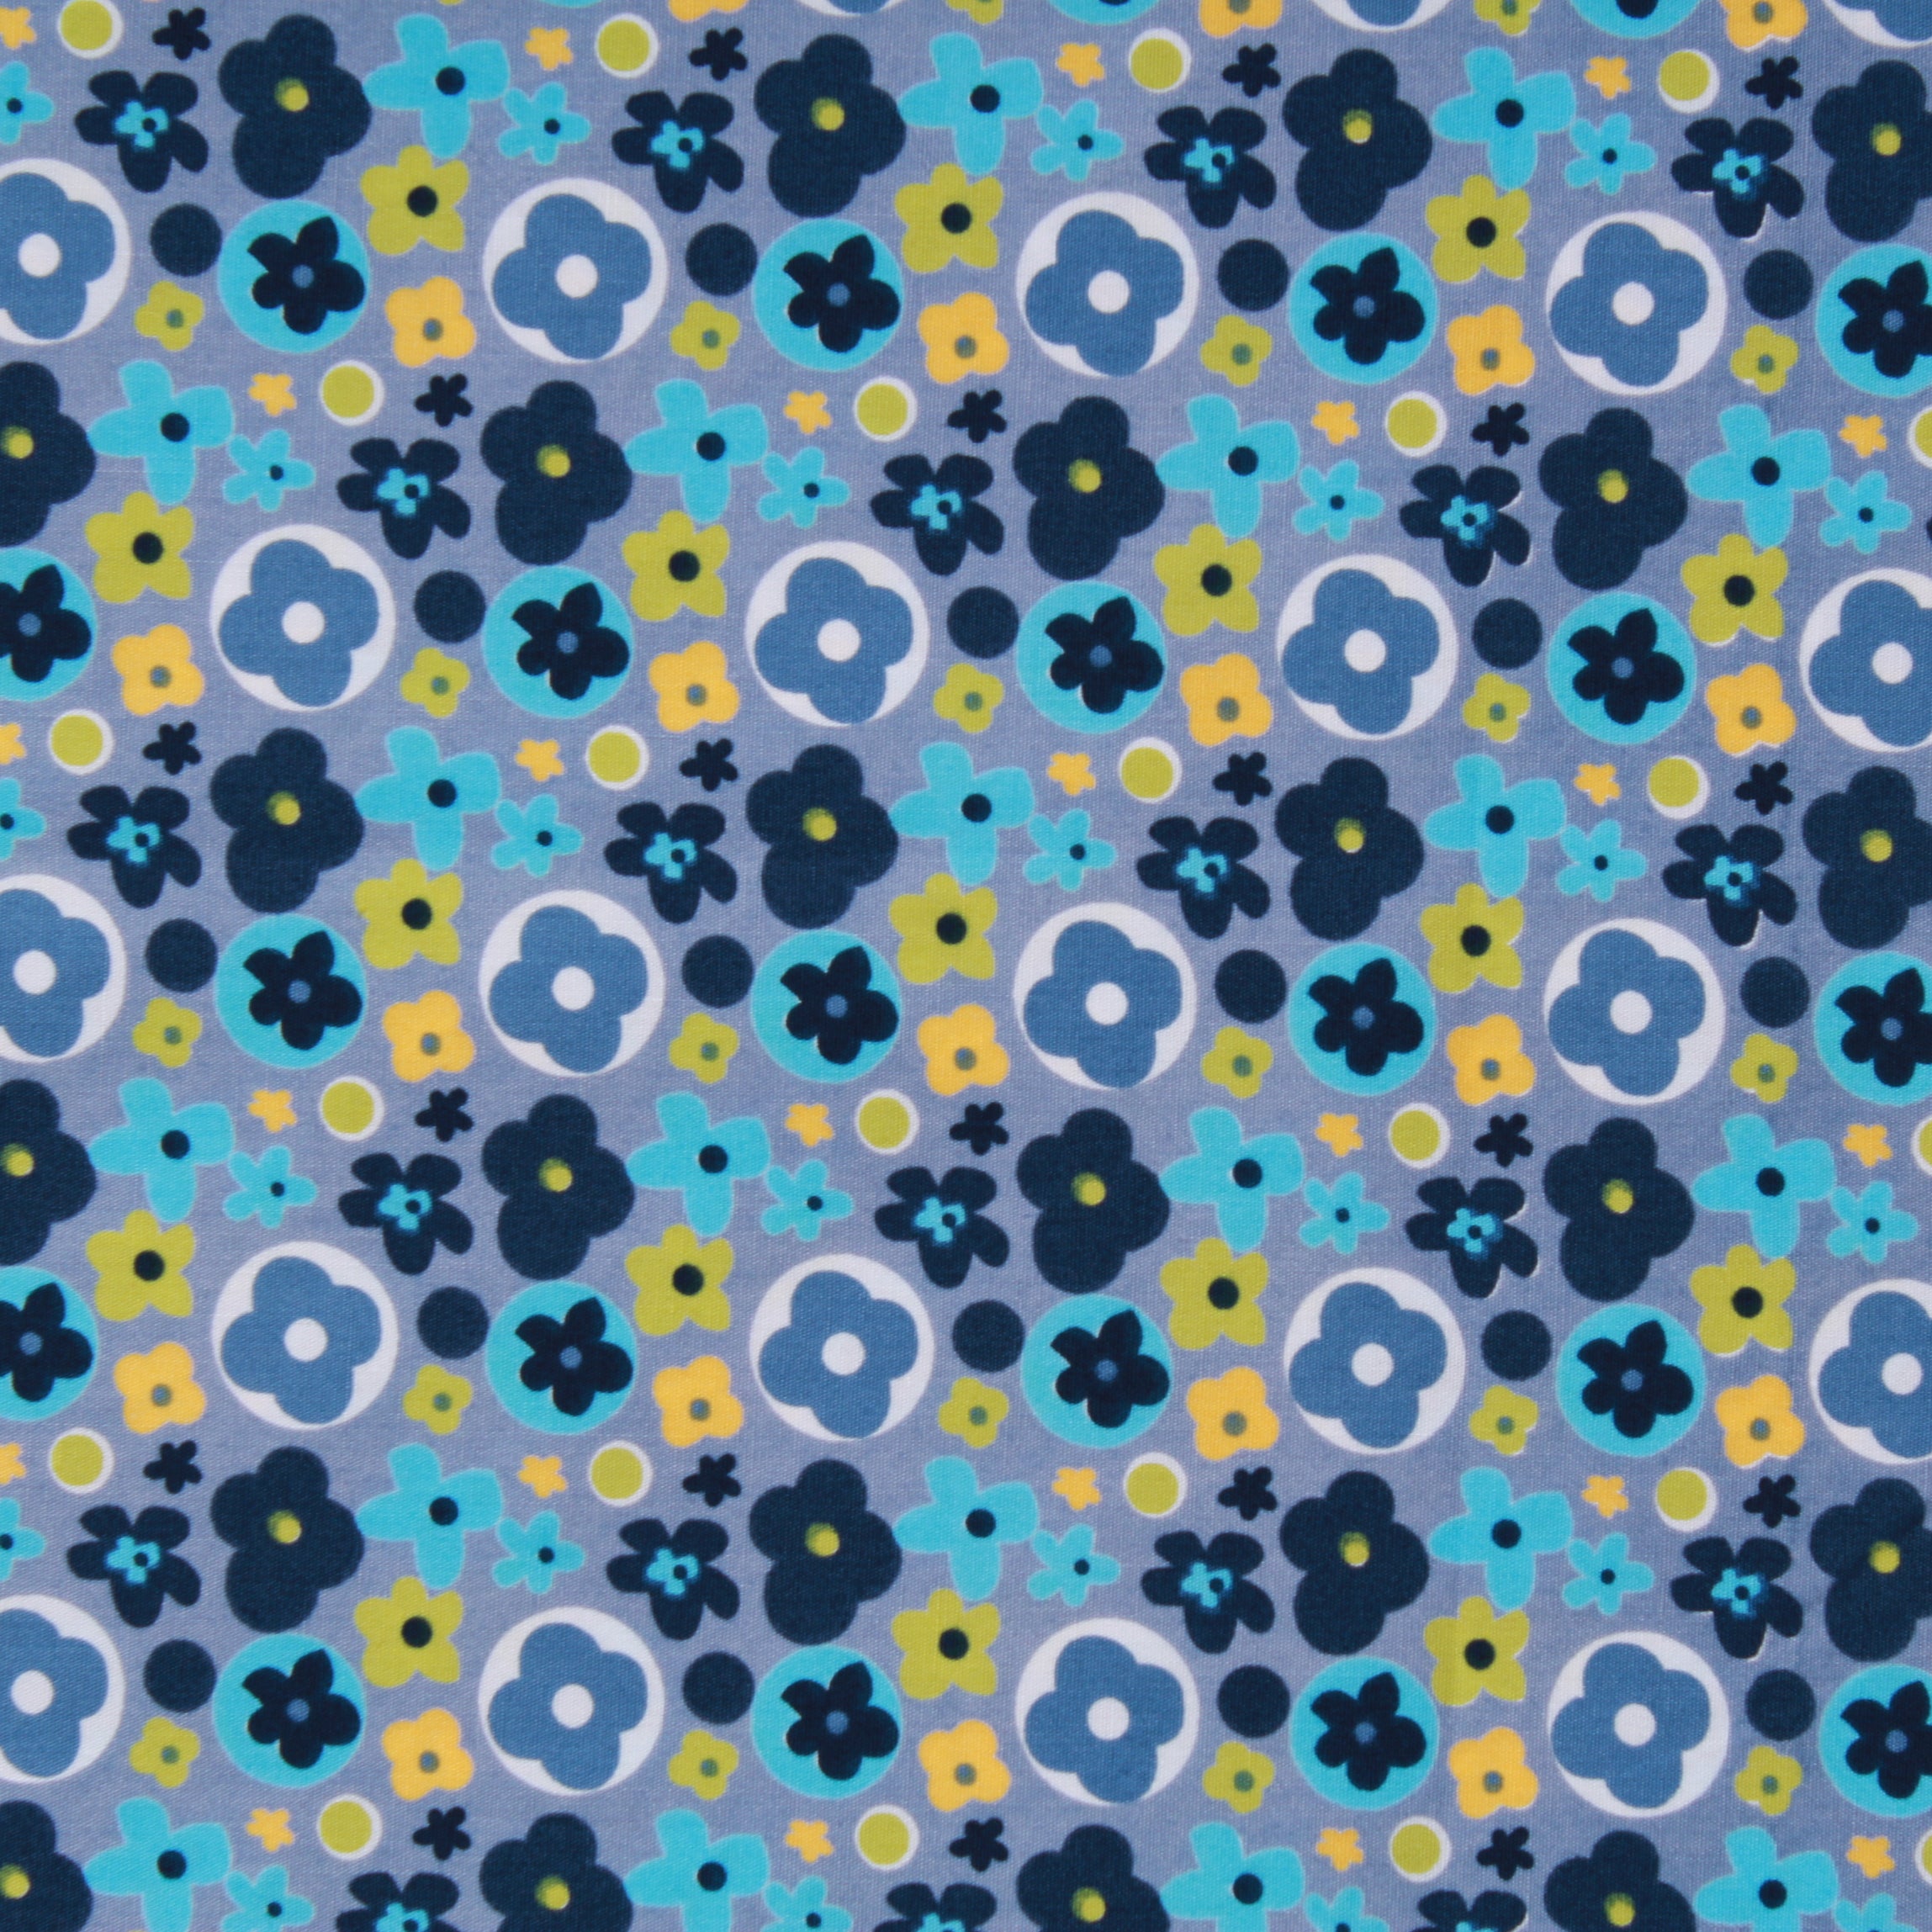 Ditsy Floral Premium 100% Printed Cotton Fabric. High Quality. Approx. 44  (112cm) Wide. - Light Blue / Sample